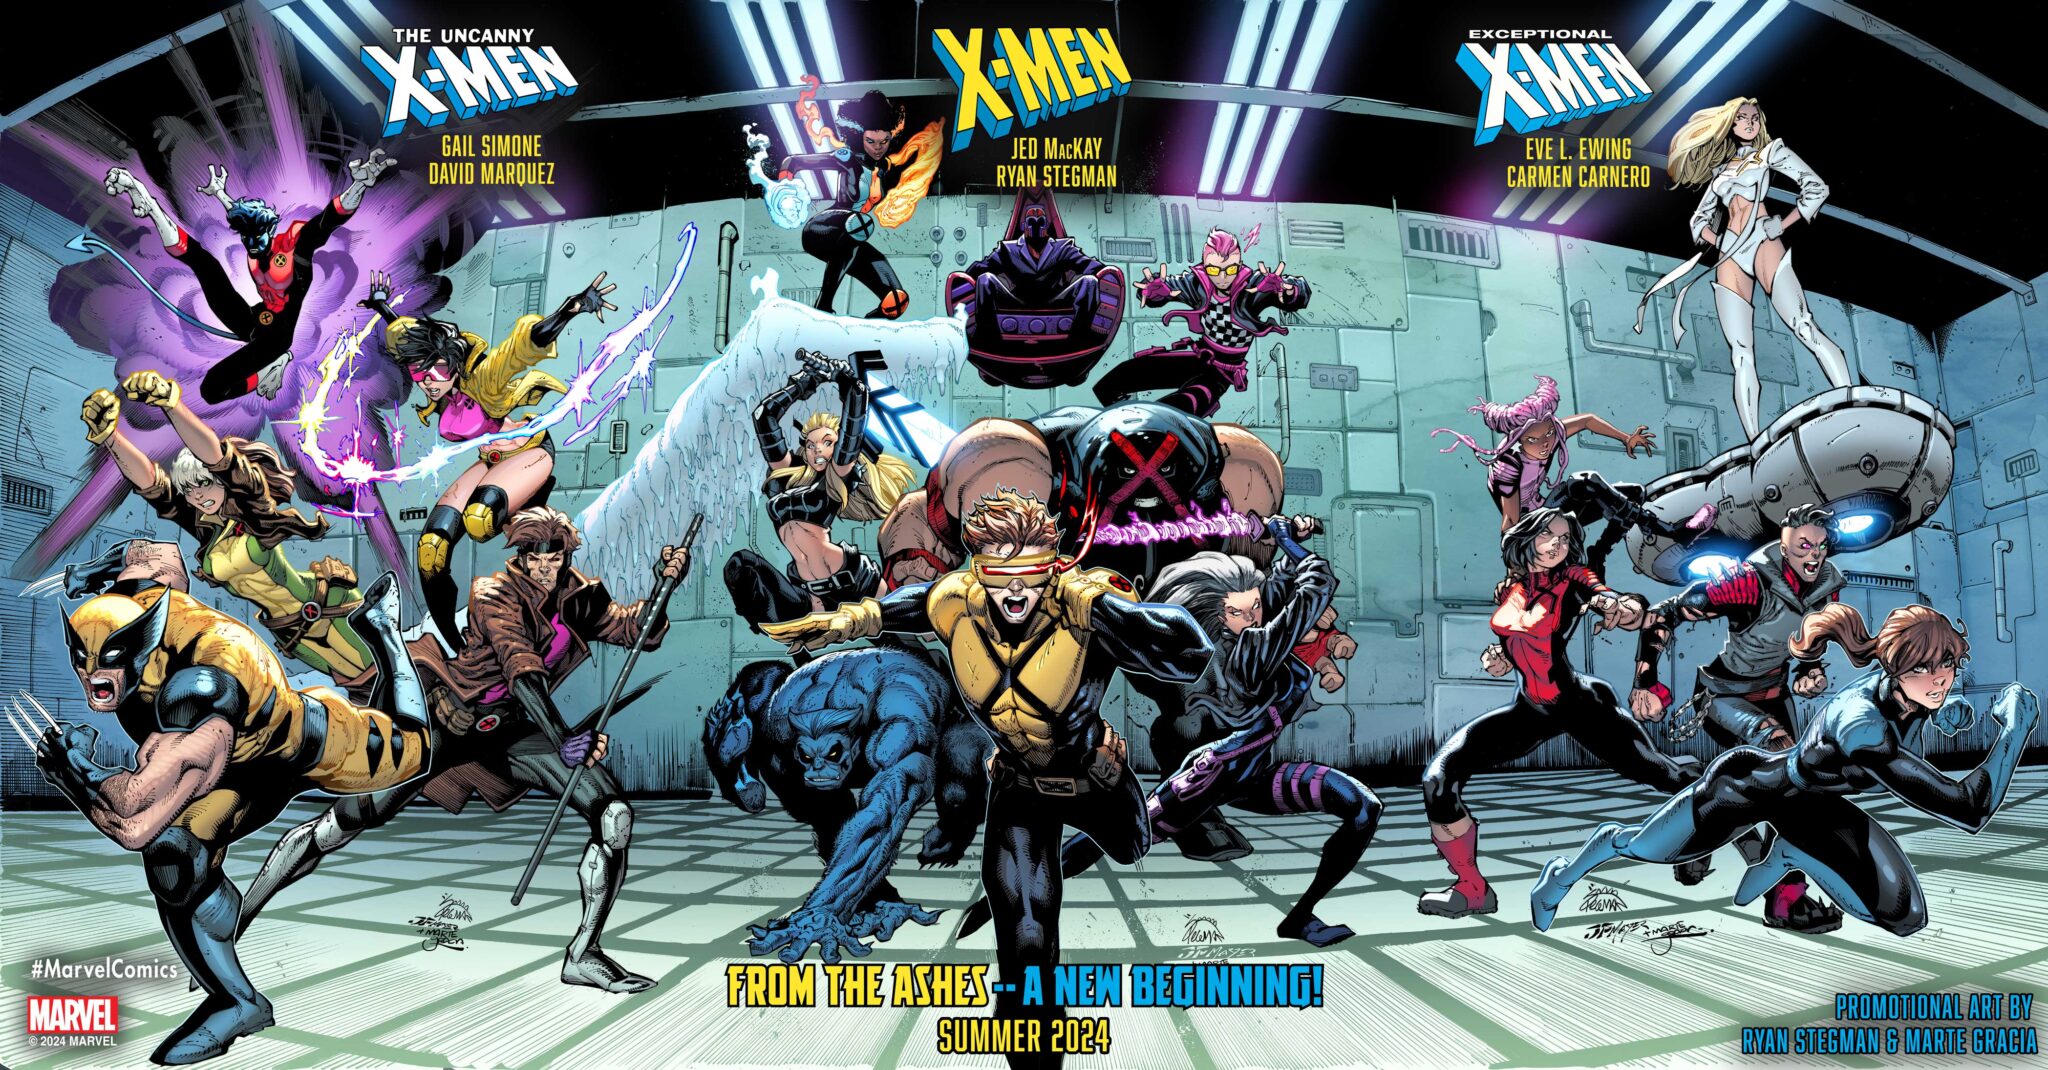 X-Men from the ashes teaser